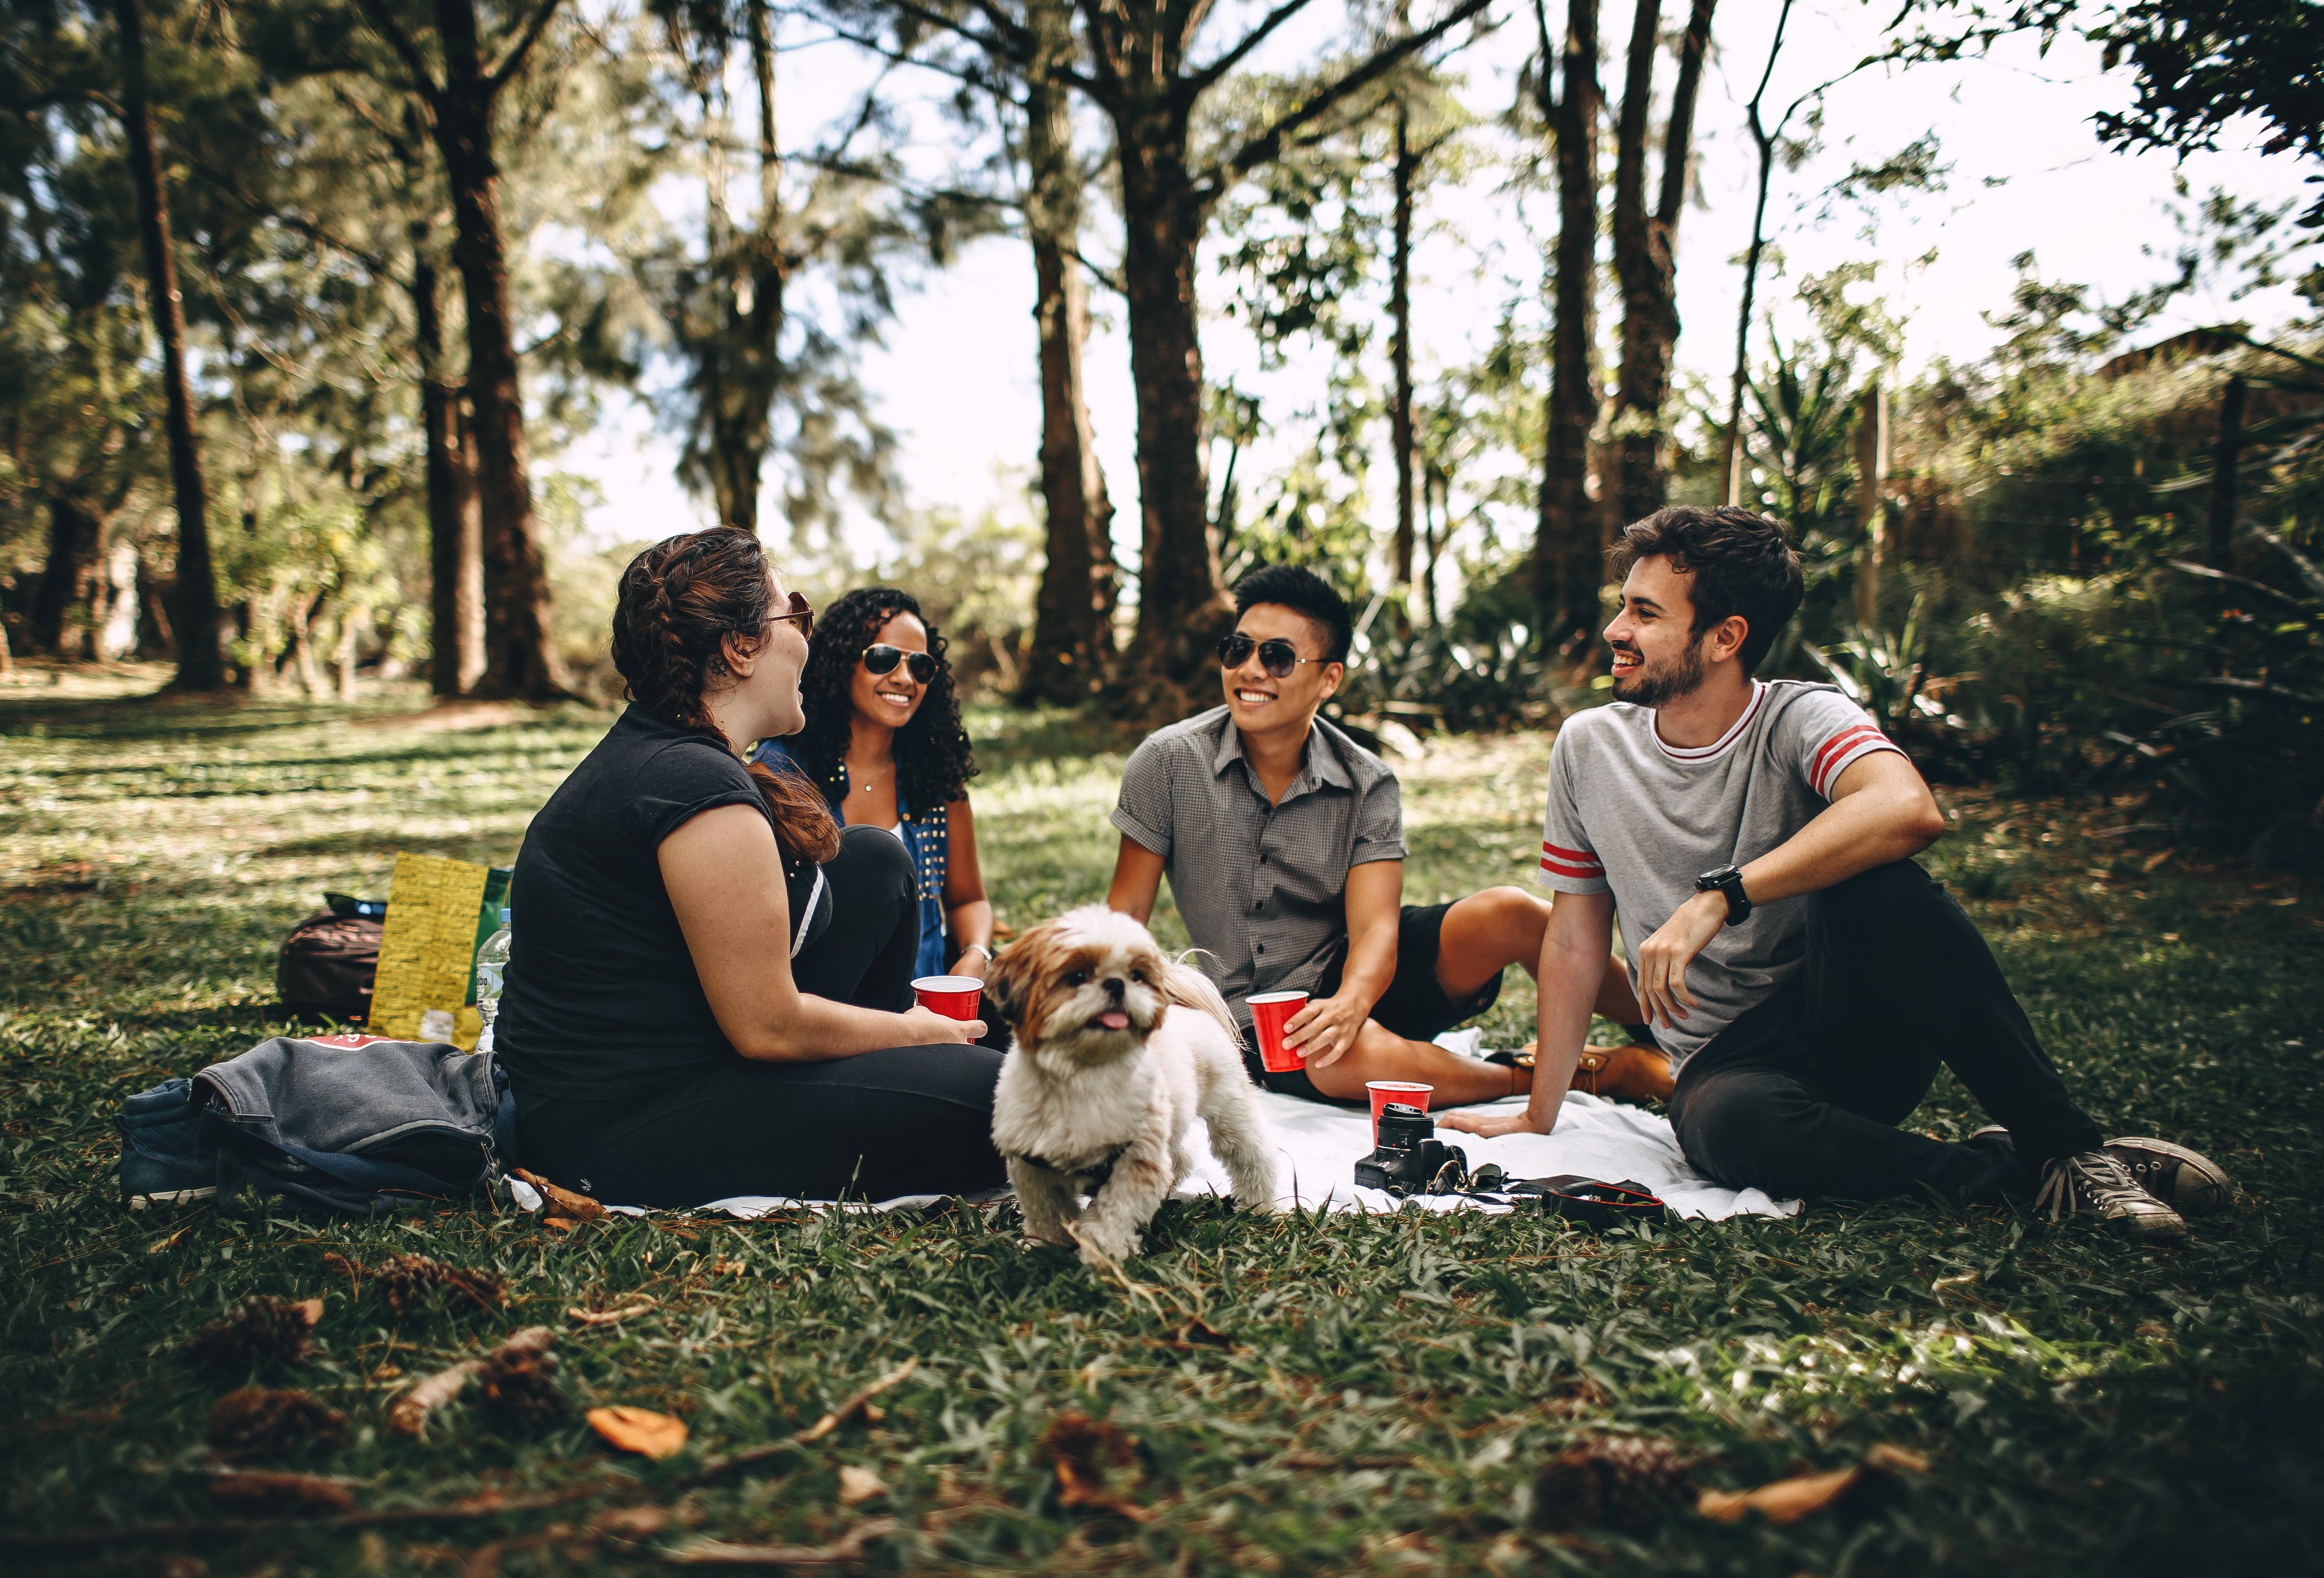 people having a picnic in grass, tree covered area with small dog